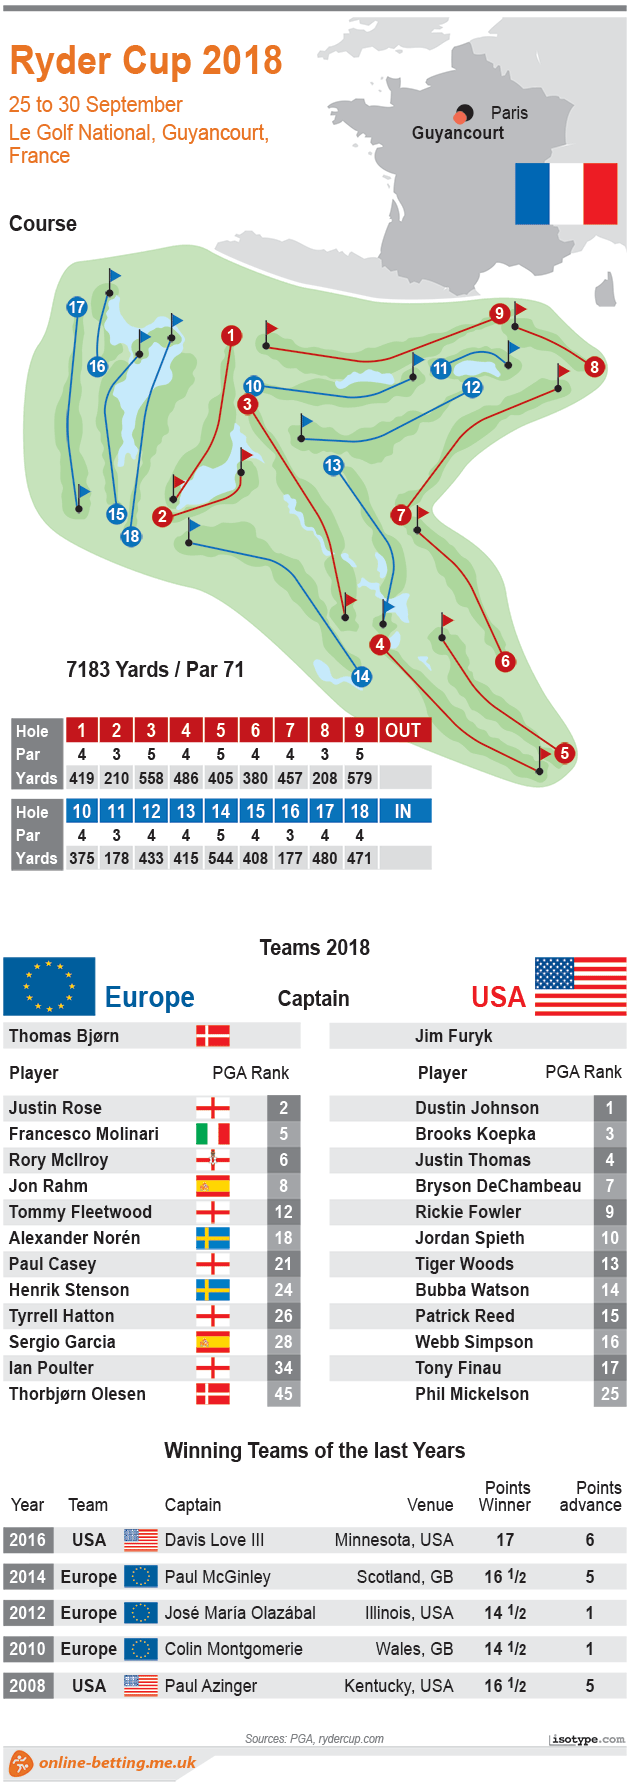 Ryder Cup 2018 2018 Infographic